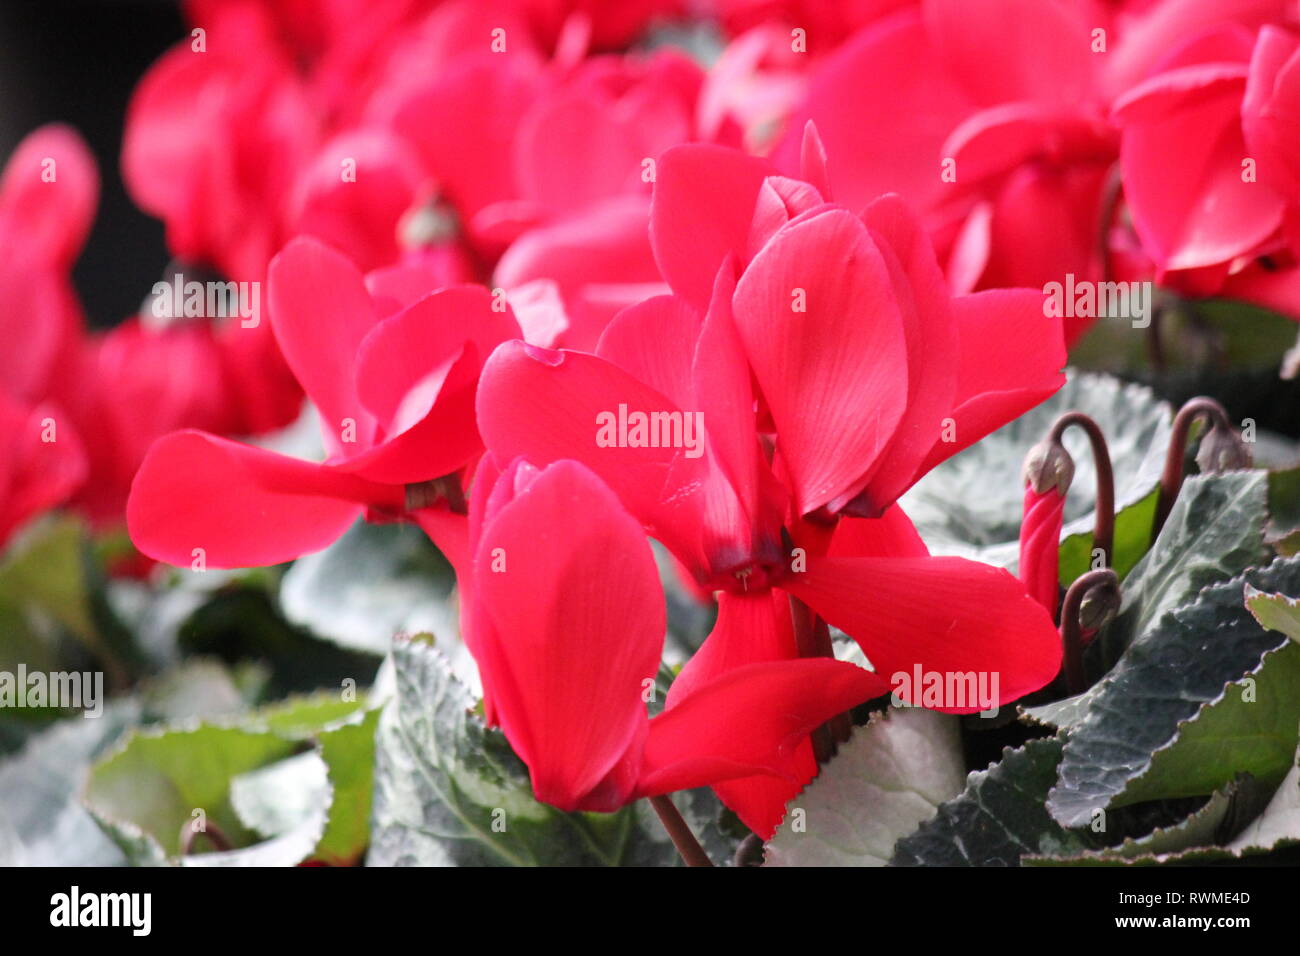 Beautiful, fresh cyclamen persicum bright red very romantic flowers and plants growing in the flower garden. Stock Photo